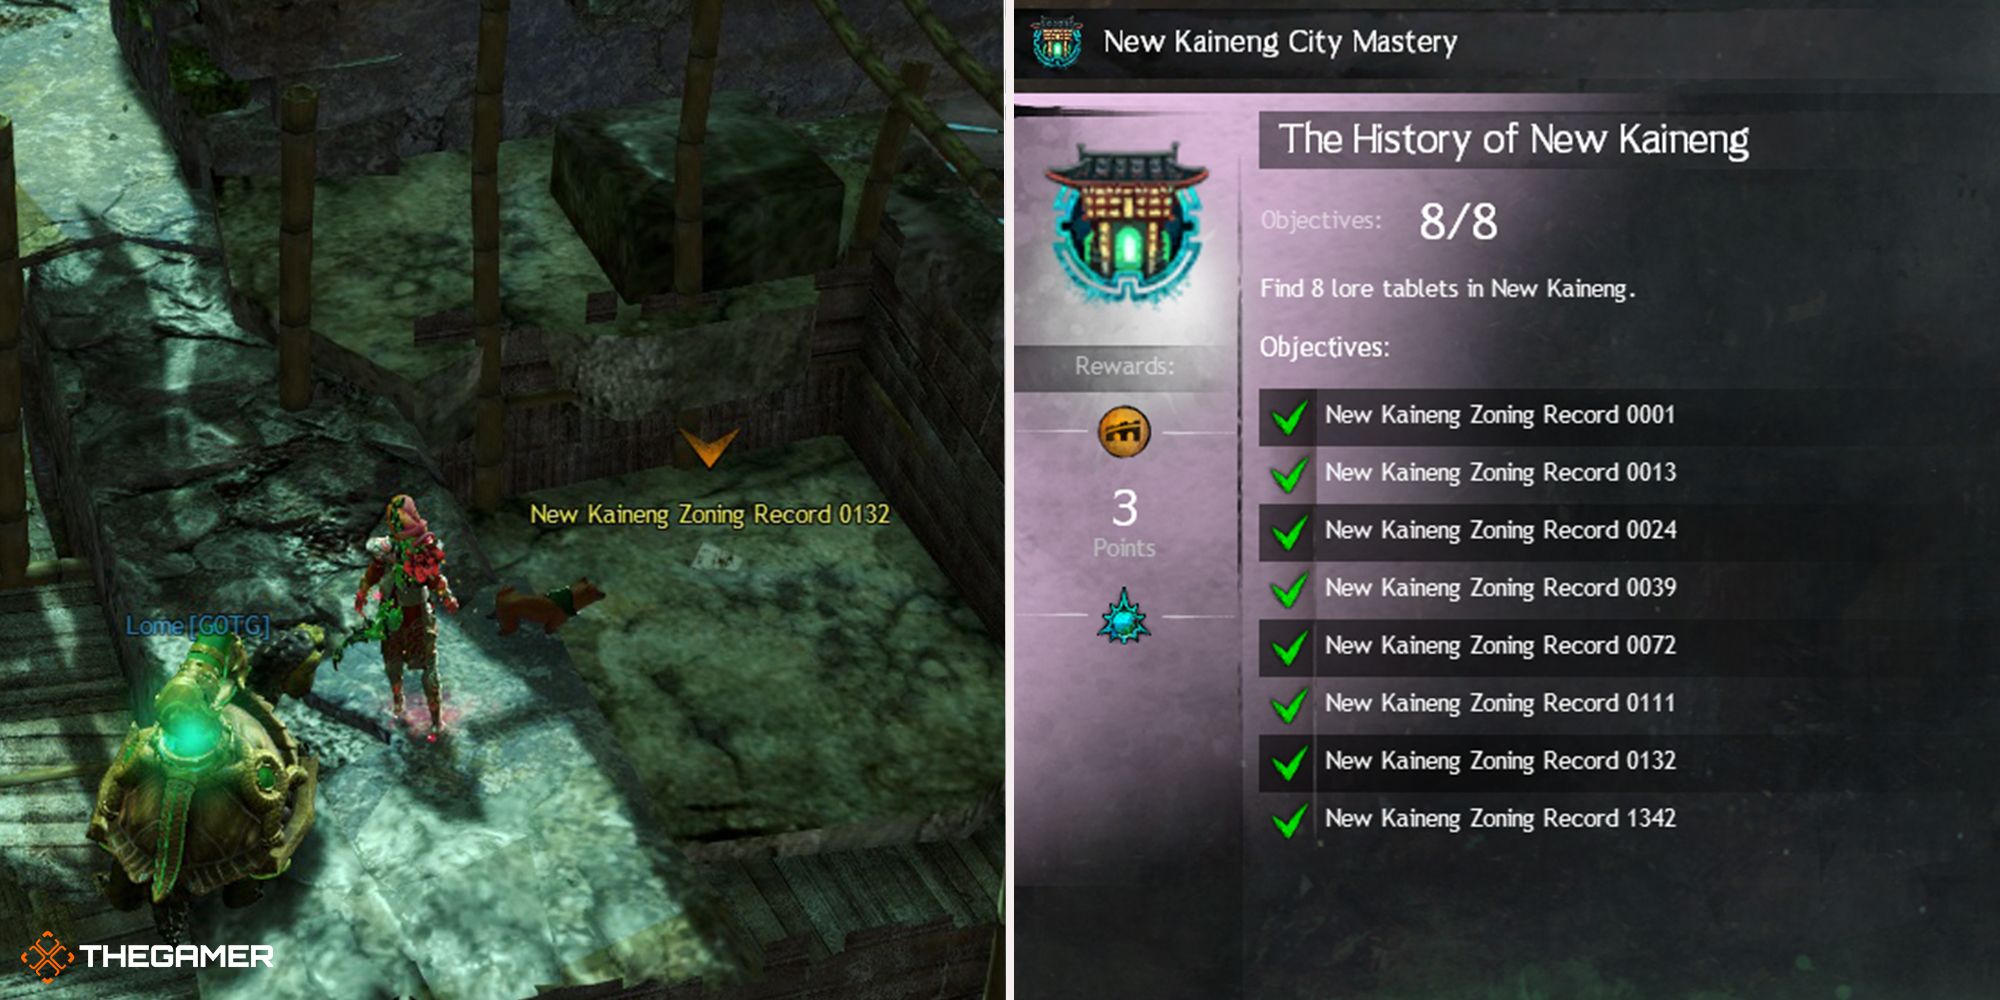 guild wars 2 end of dragons - new kaineng city history achievement